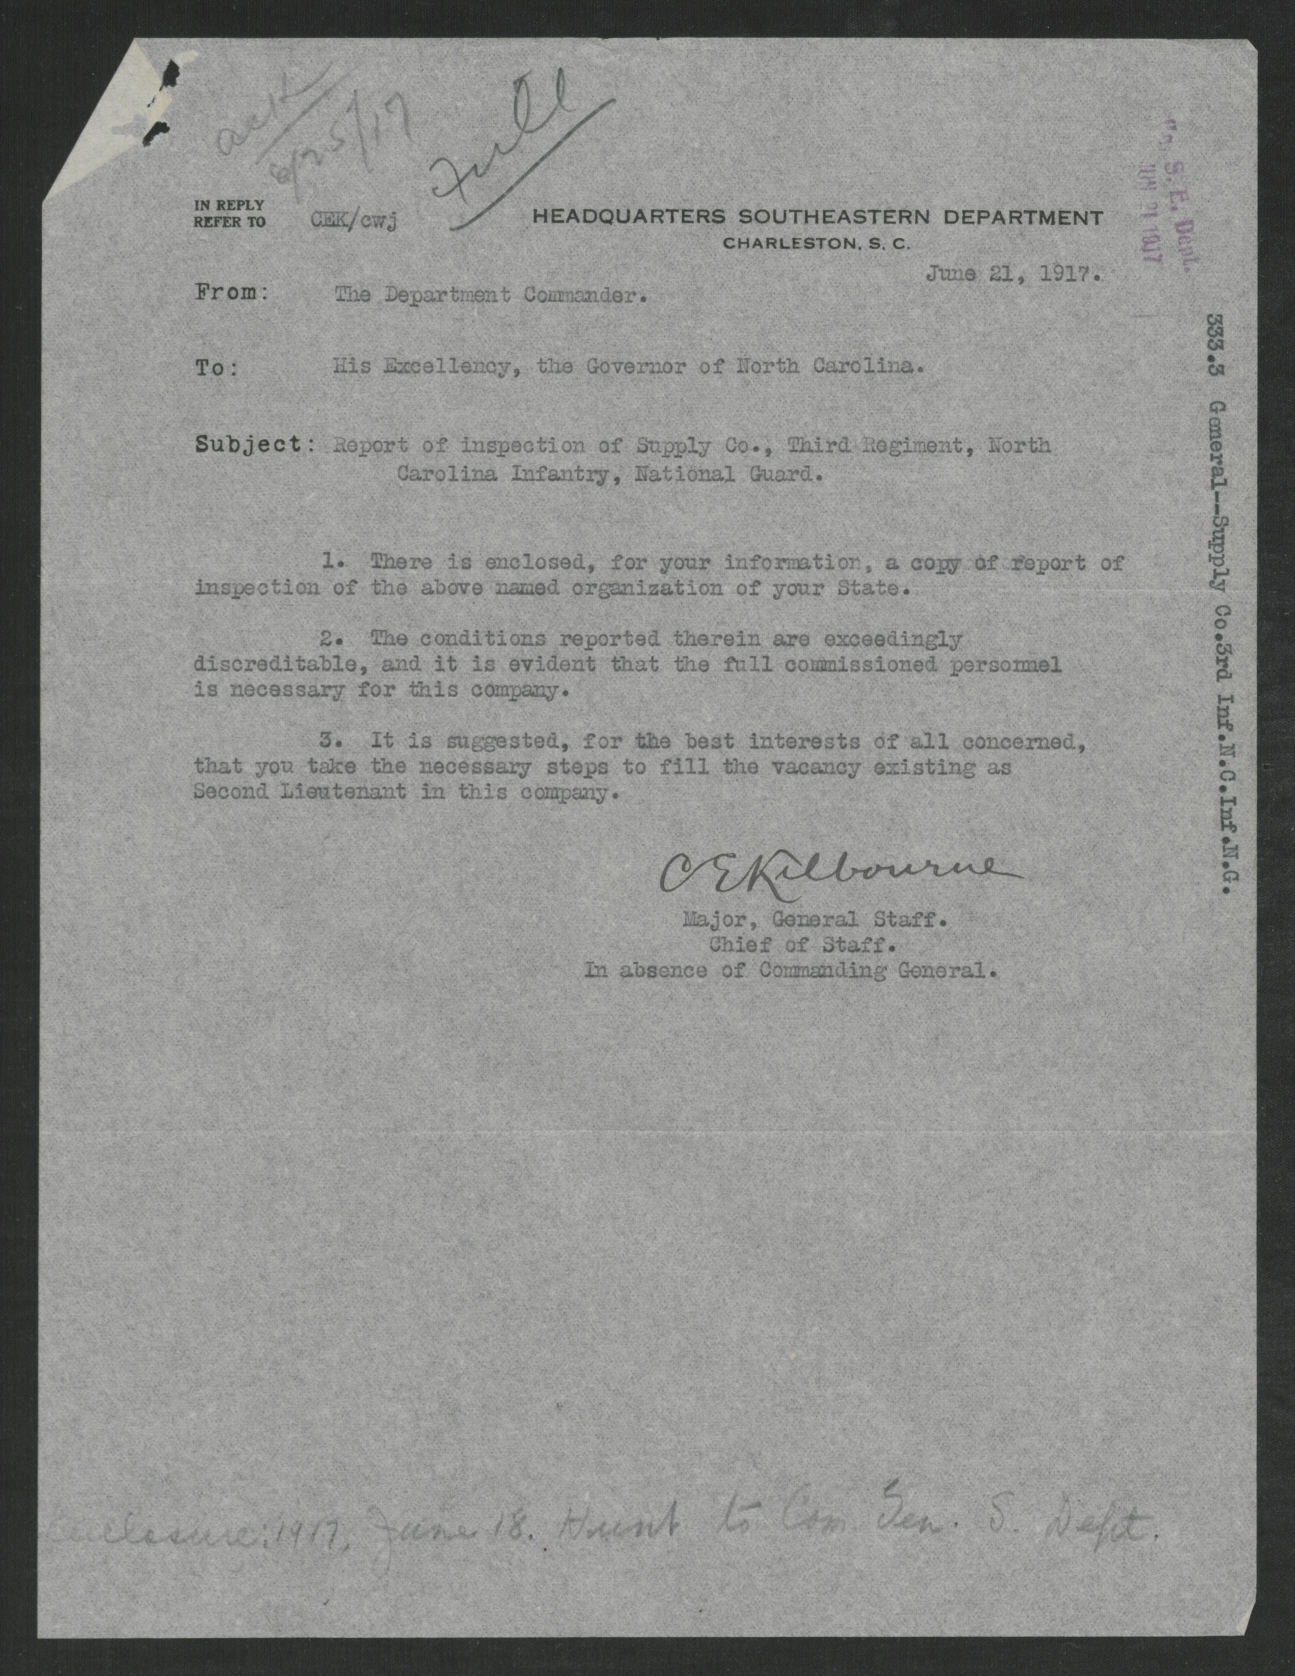 Letter from Charles E. Kilbourne to Thomas W. Bickett, June 21, 1917